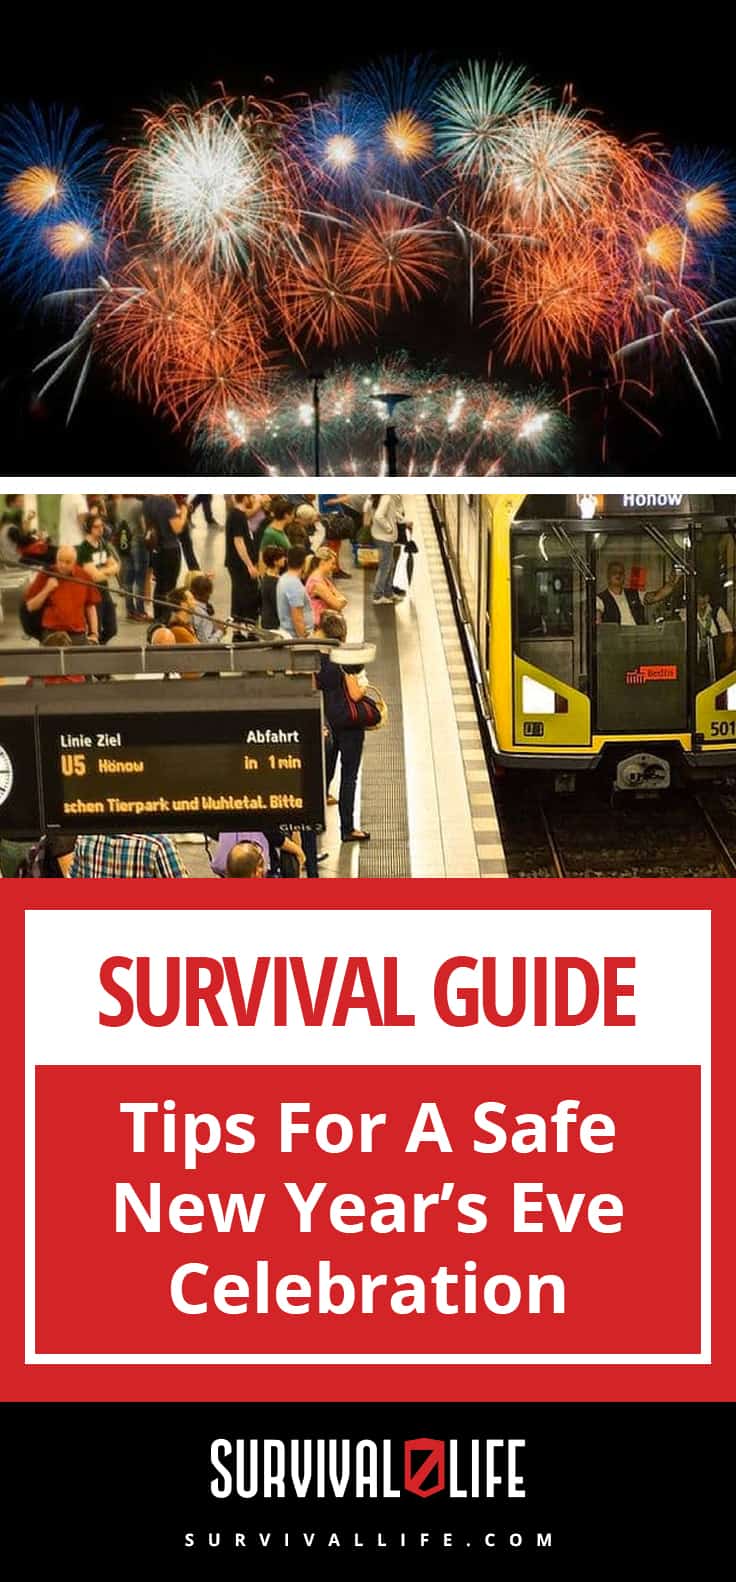 Survival Guide | Tips For A Safe New Year’s Eve Celebration